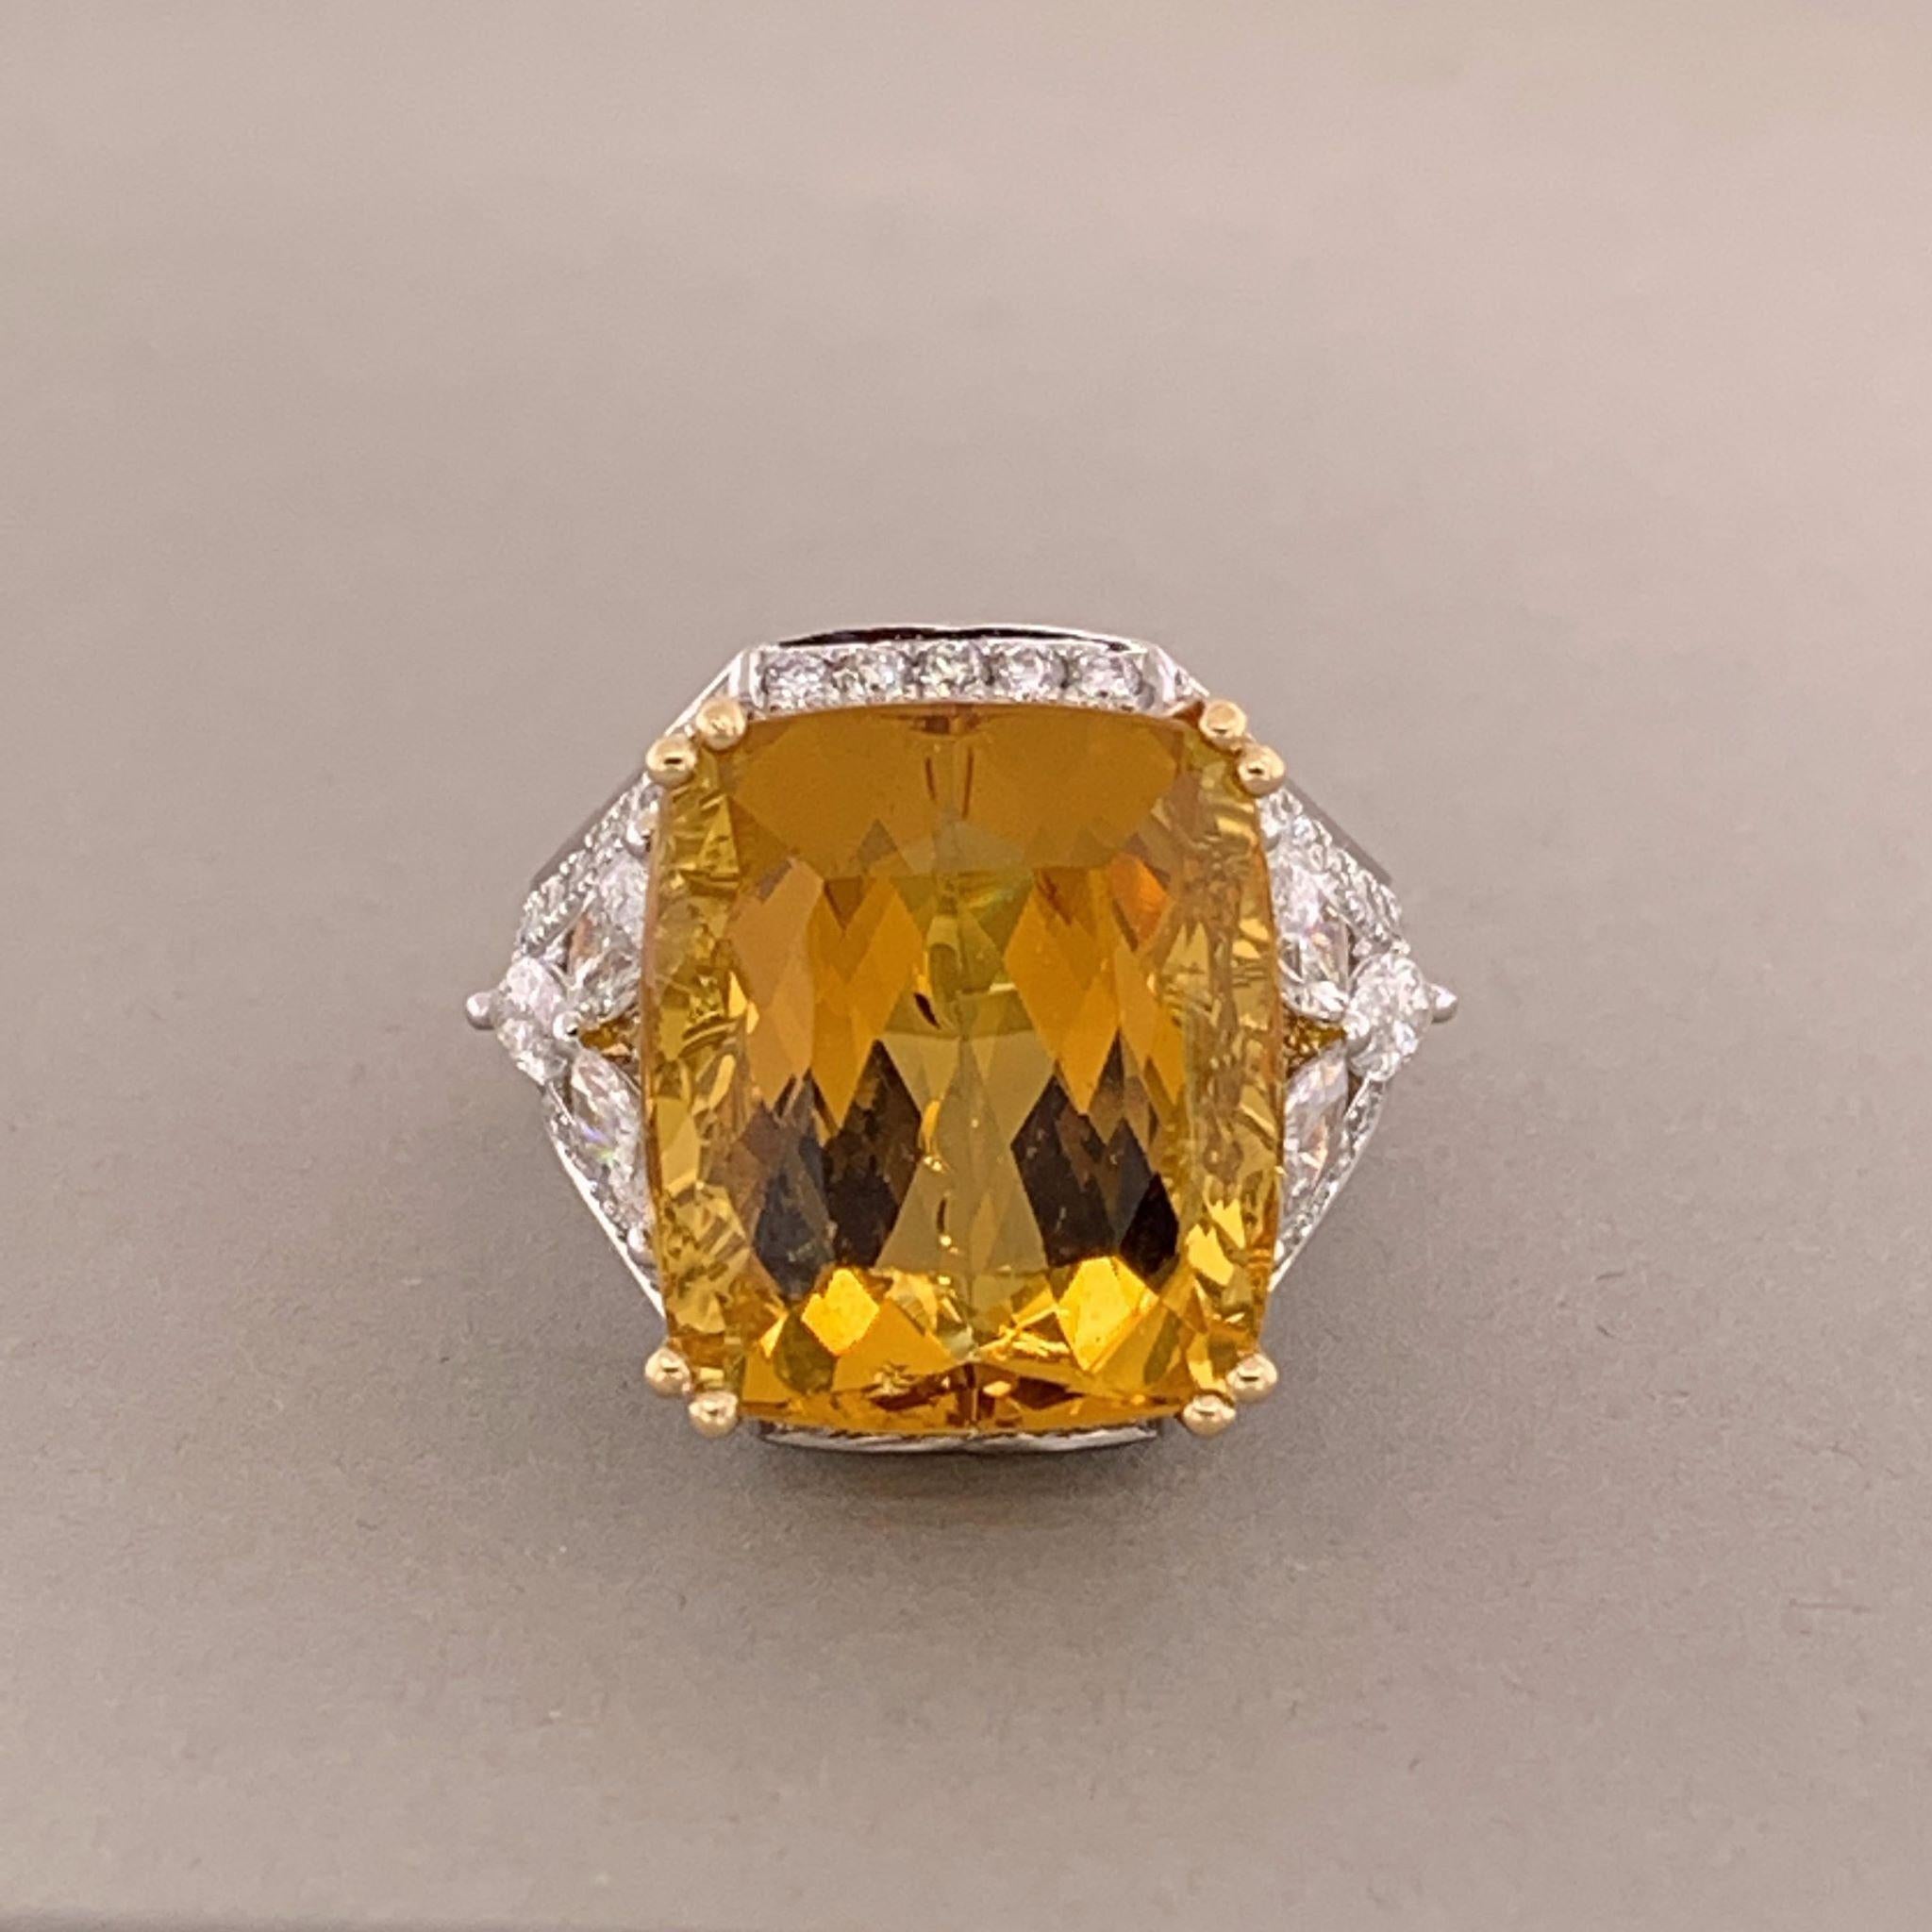 Heliodor is the yellowish-orange to orangy-yellow variety of the beryl family which has a wide variety of popular gems including emerald (green), aquamarine (blue) and morganite (light pink). The heliodor weighs in at 16.89 carats and is shaped in a